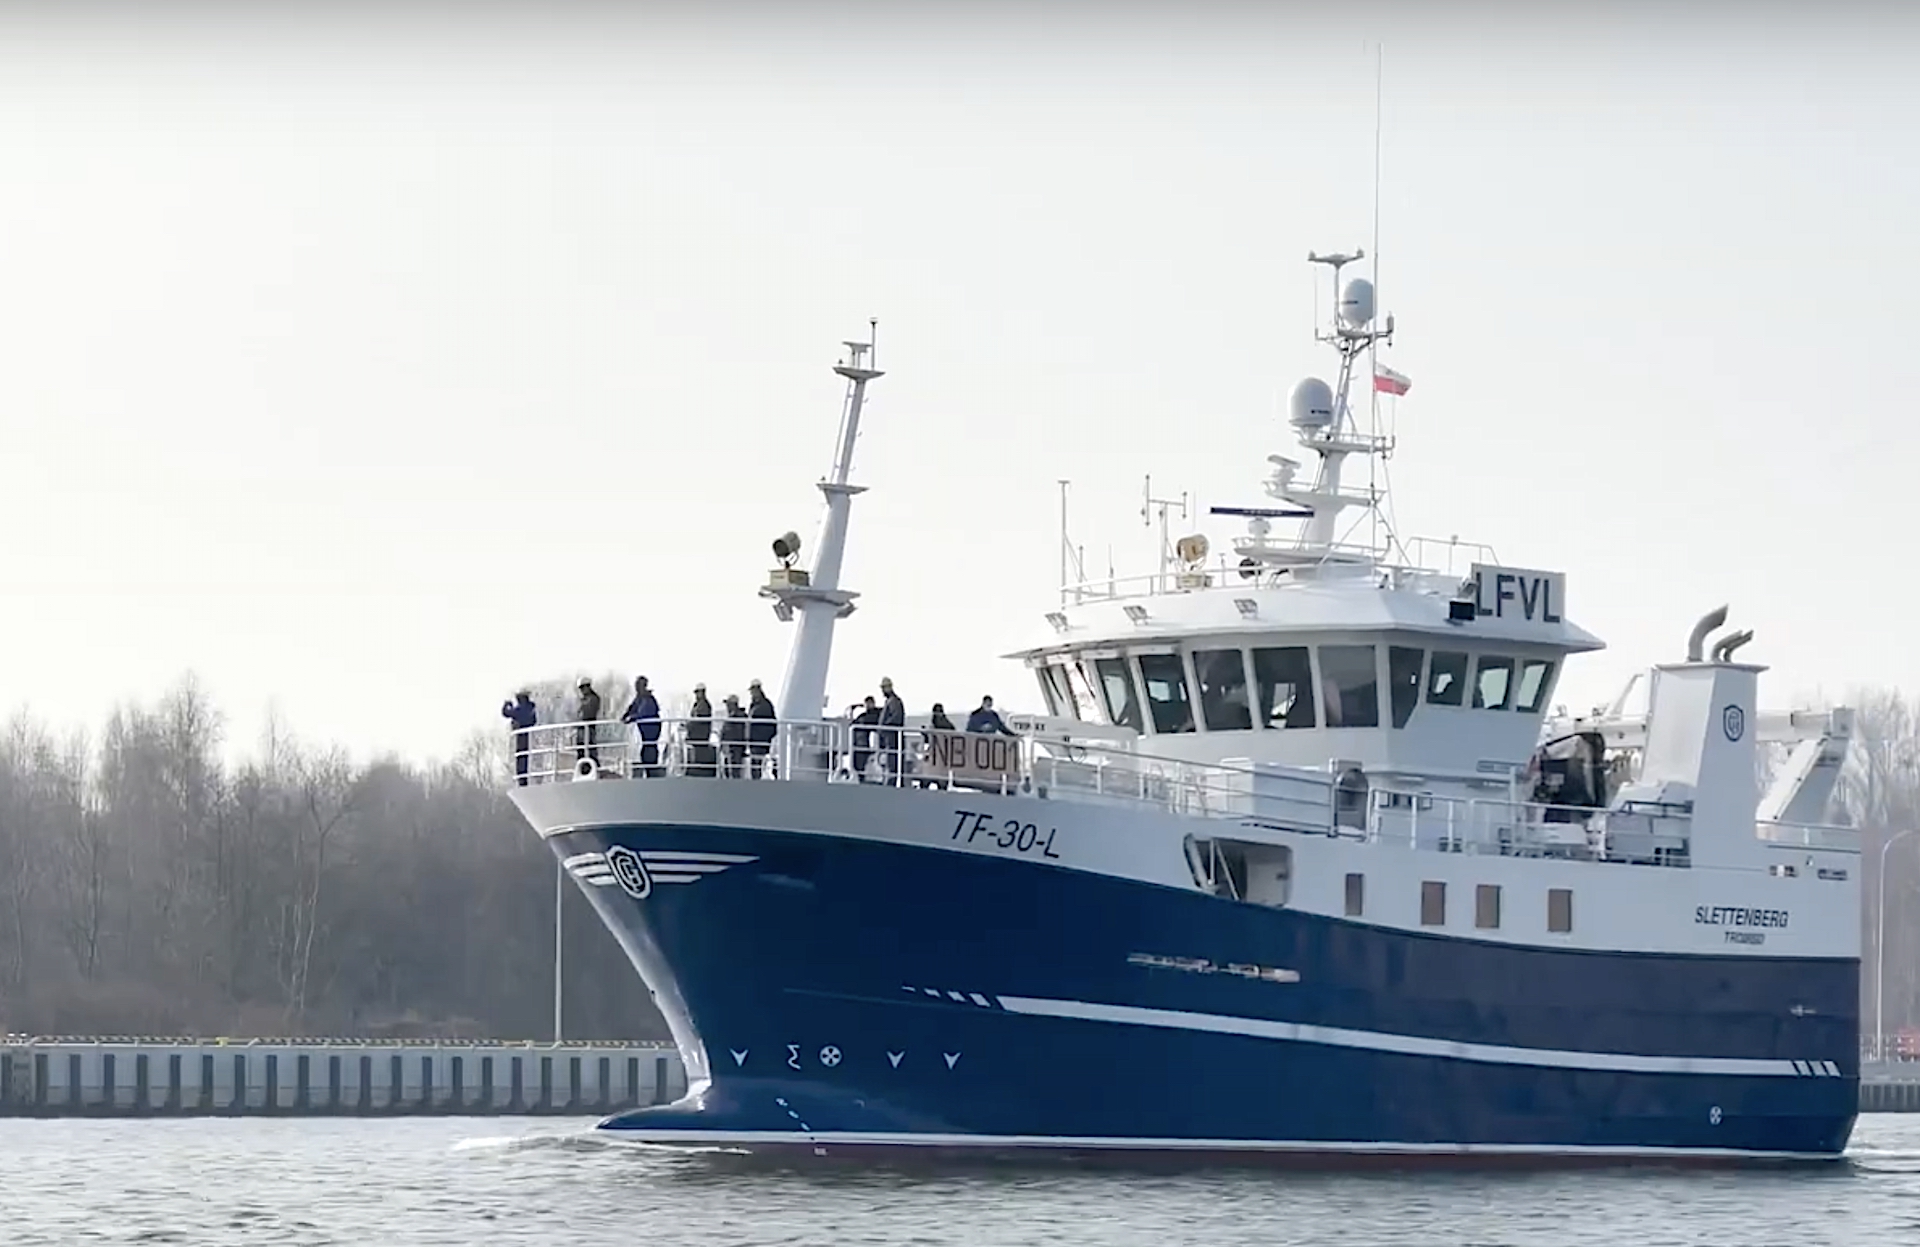 Fully equipped vessel built at Safe shipyard in Gdańsk started sea trials [video] - MarinePoland.com